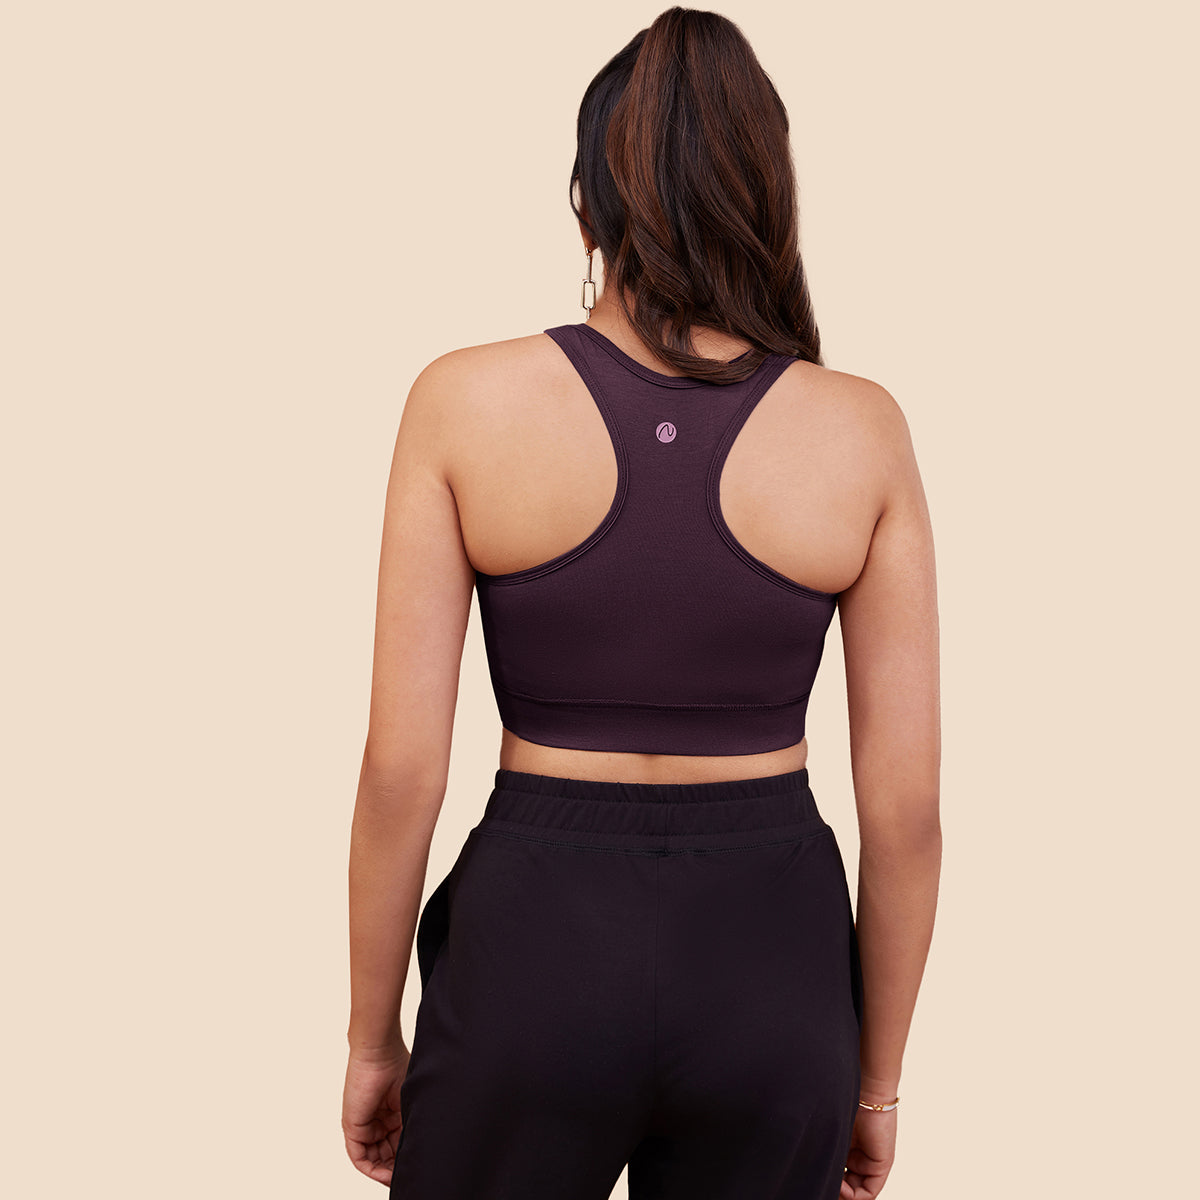 Nykd by Nykaa Nykd All day Essential Cotton Sports Bra - NYK059 Anthracite